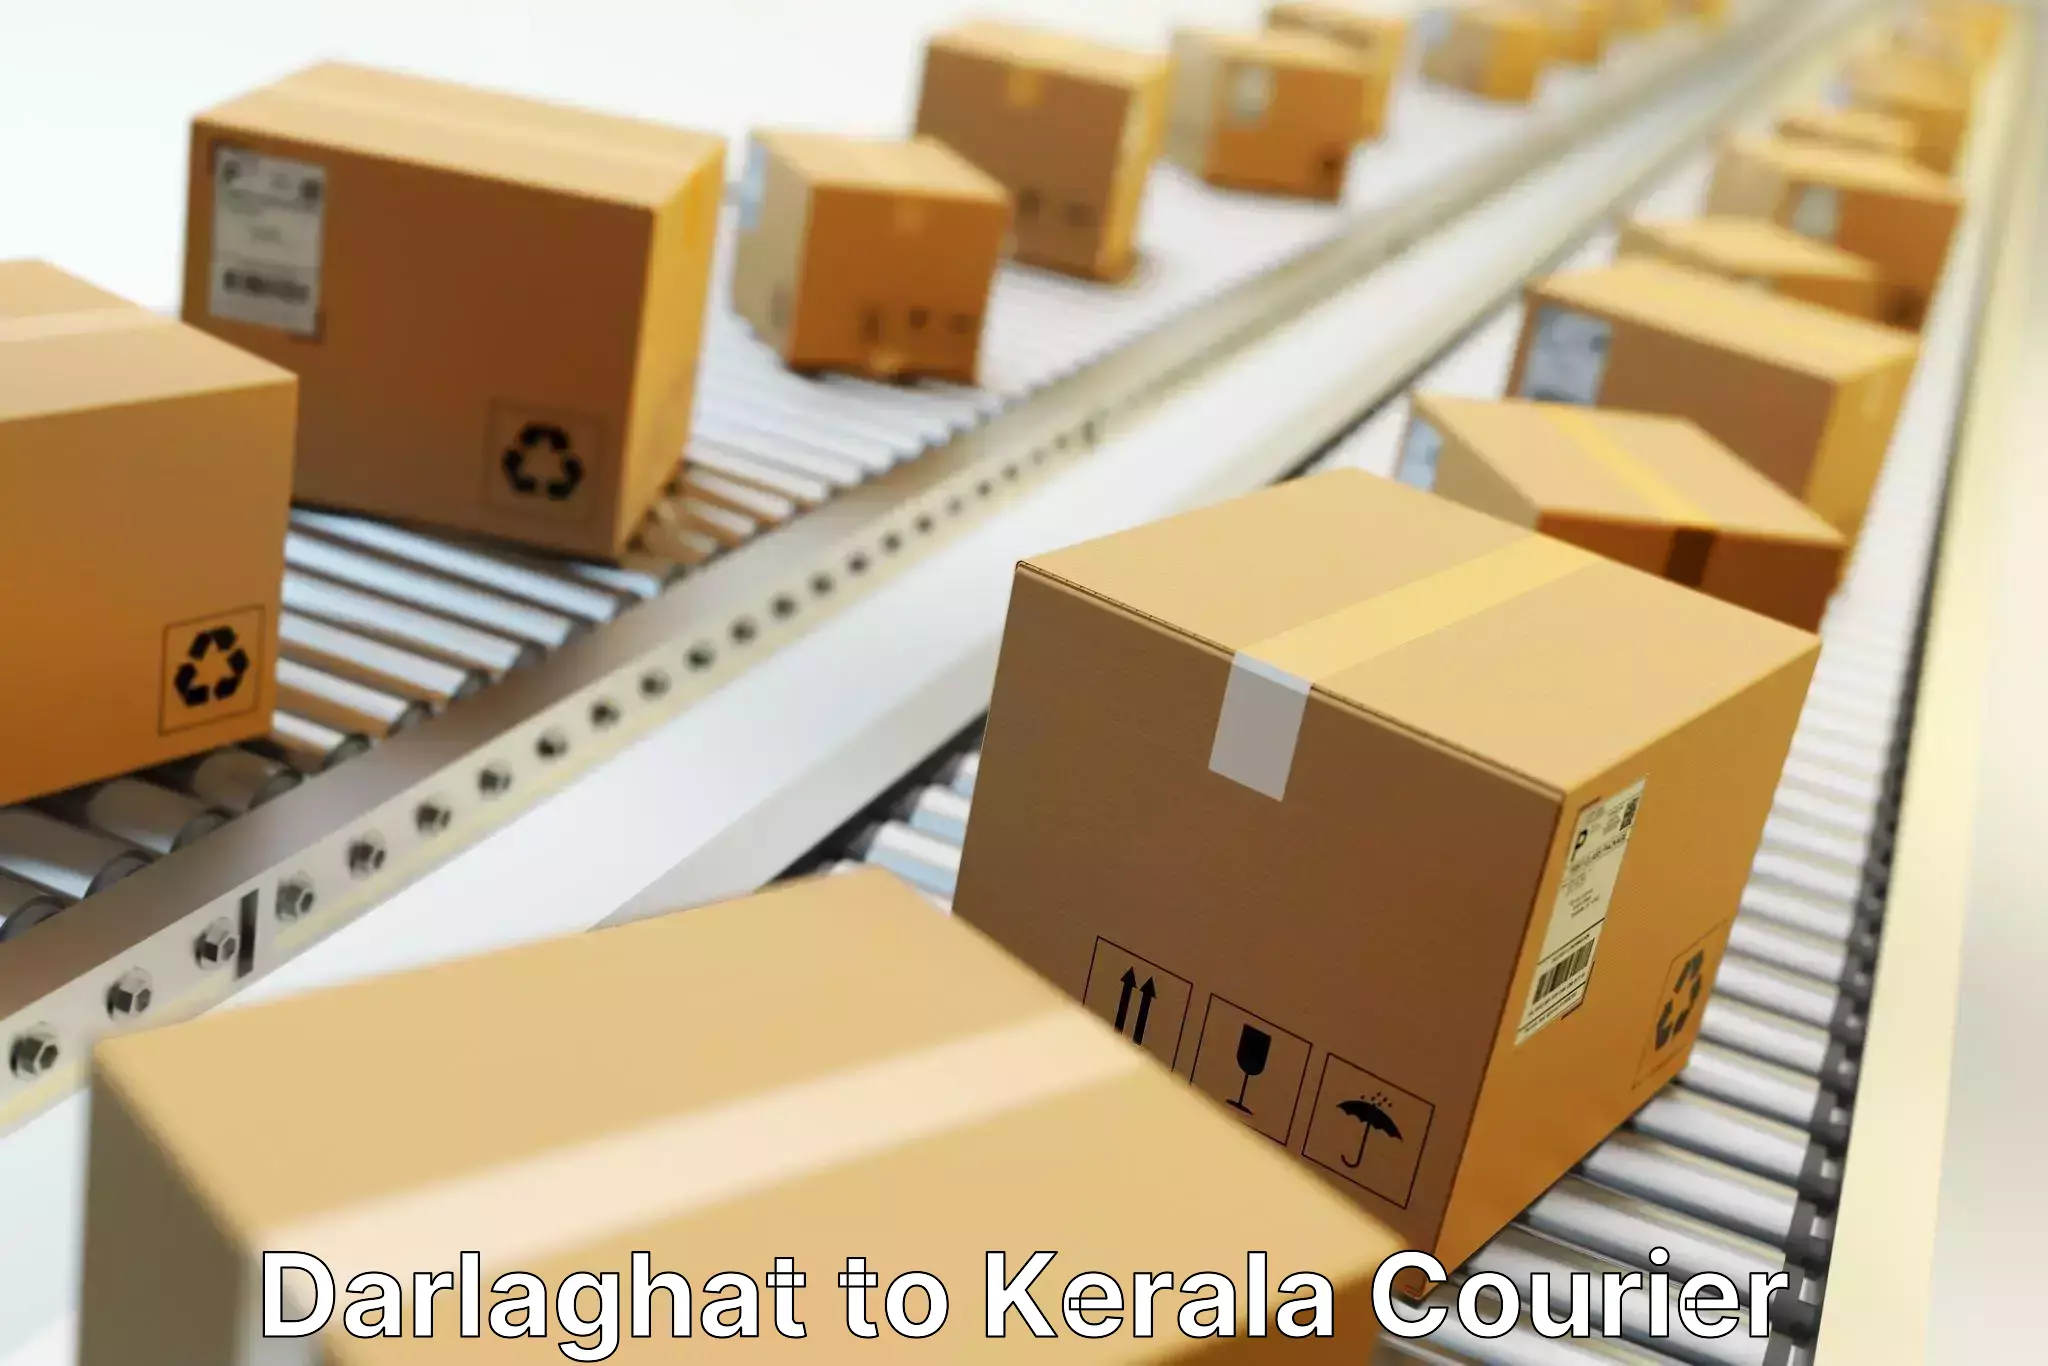 Rural area delivery Darlaghat to Cochin Port Kochi